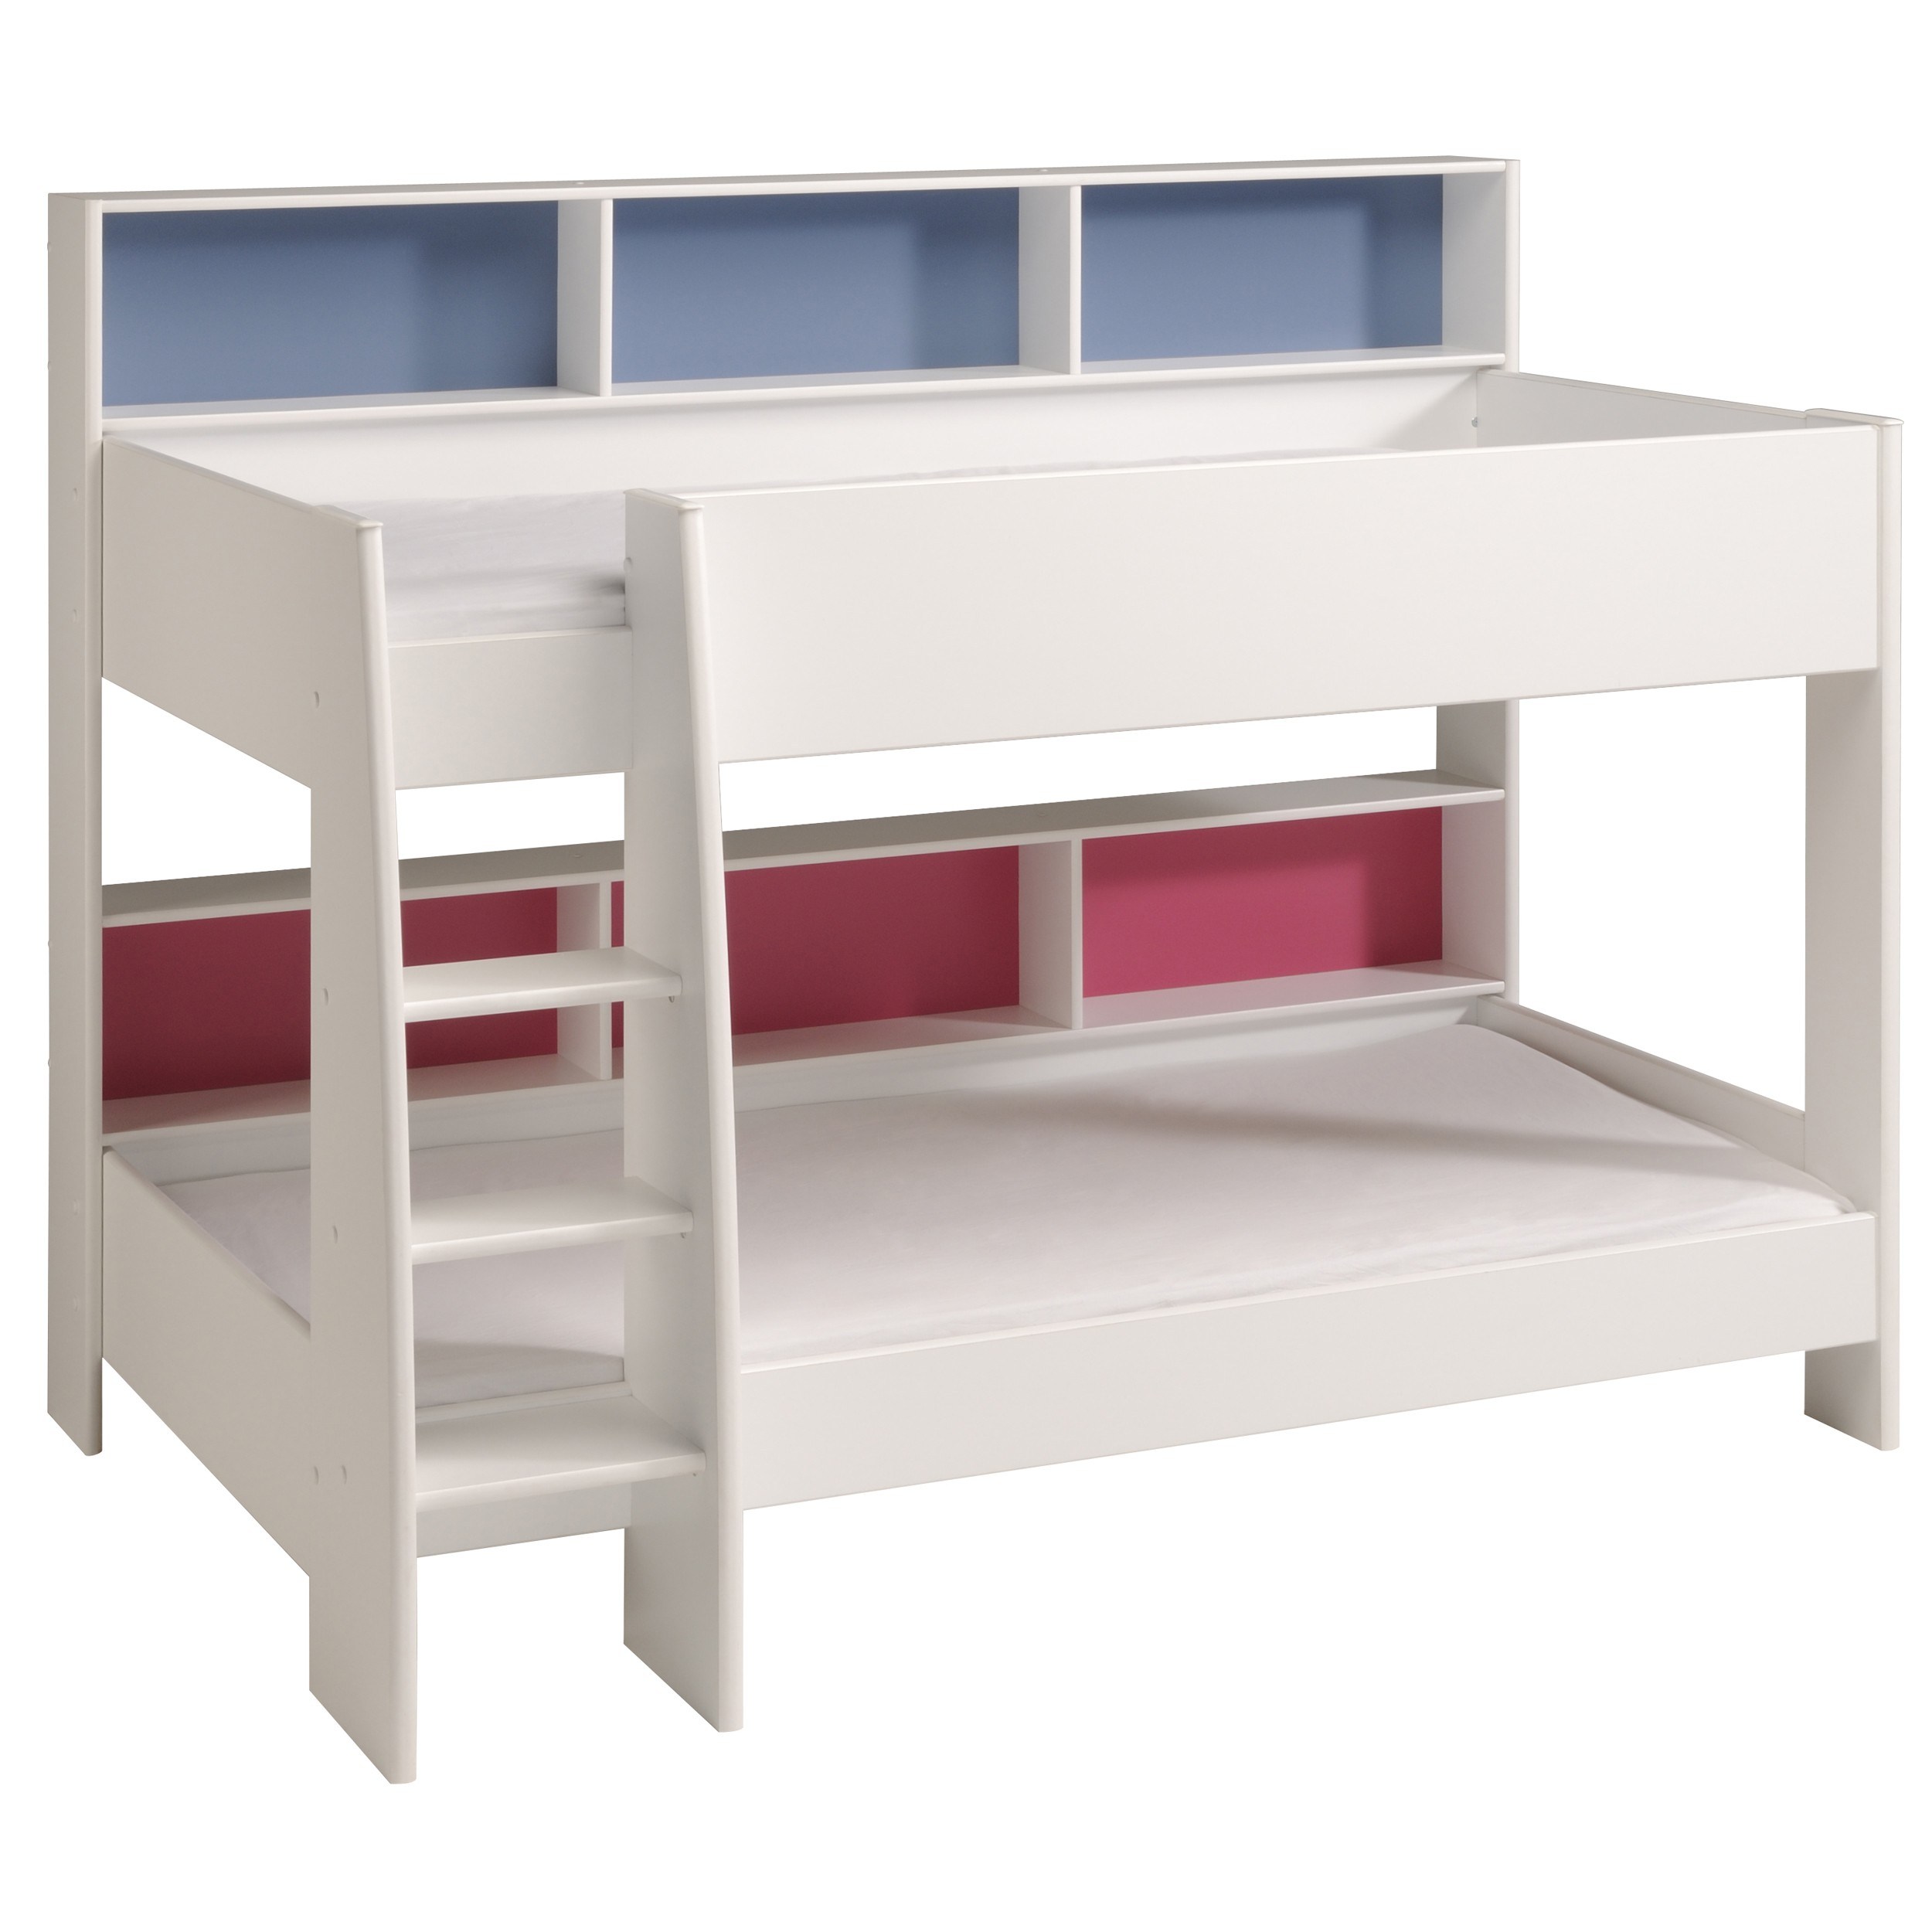 Bed 4 Drawers Double 